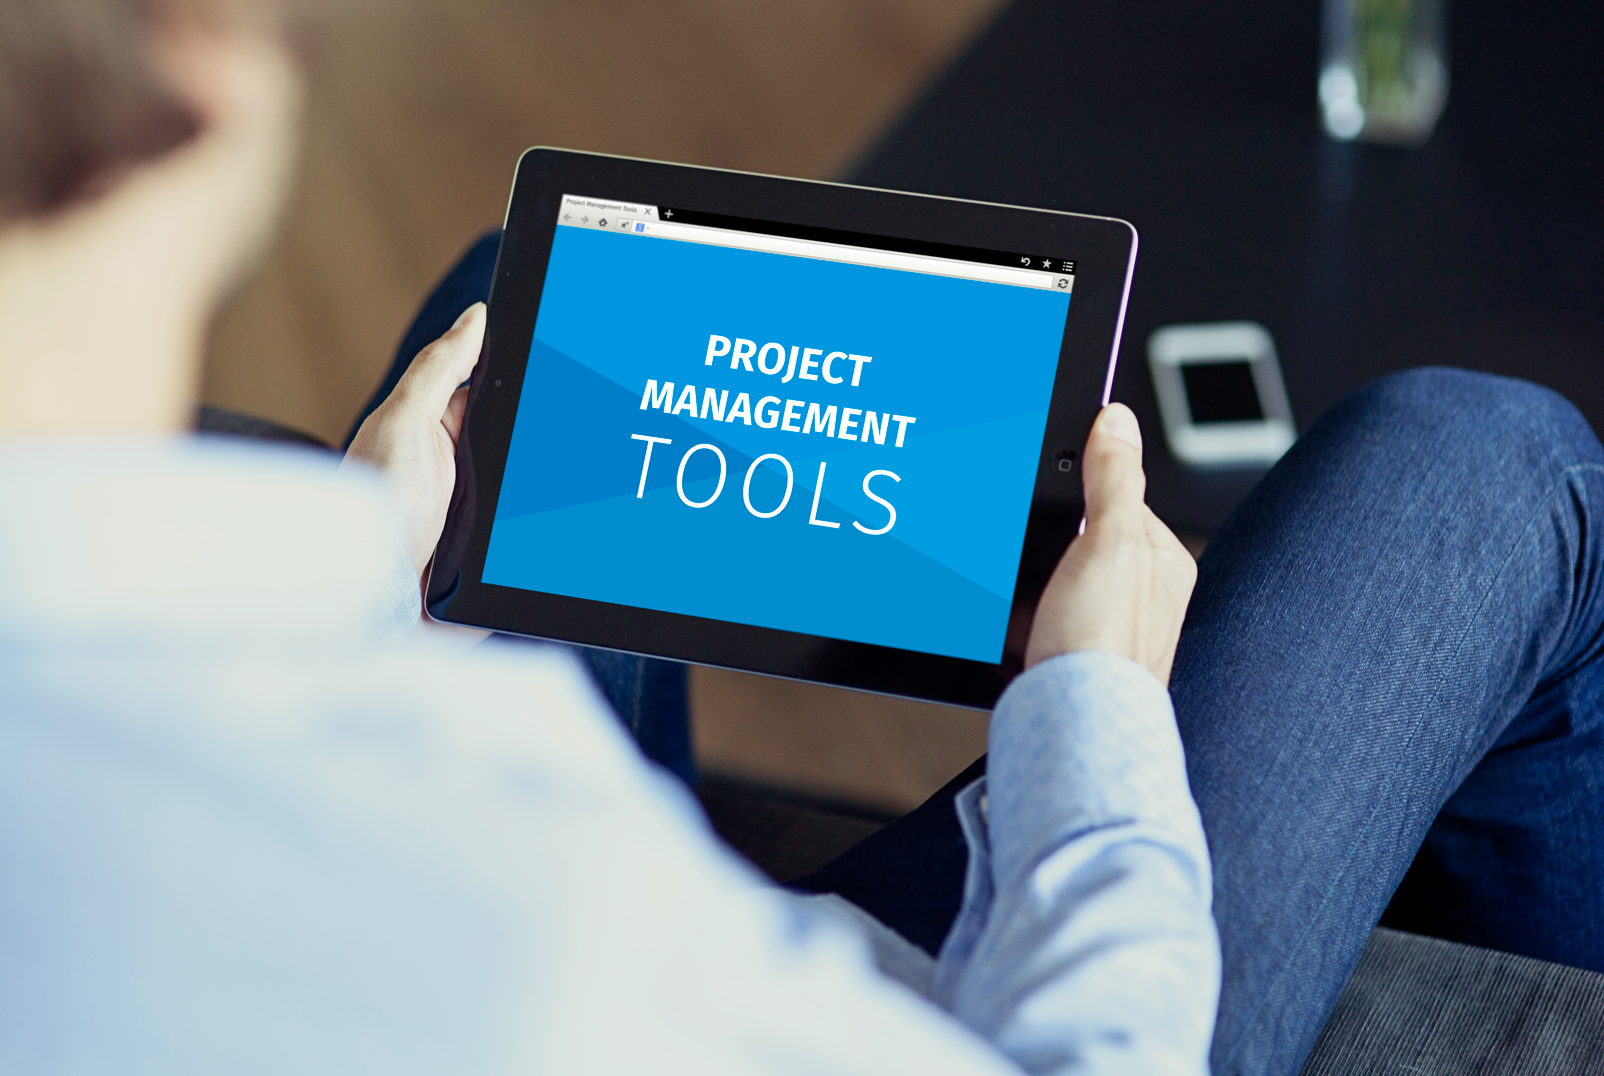 Product Management Practices – Must You Use a Product-Specific Task Management Tool?